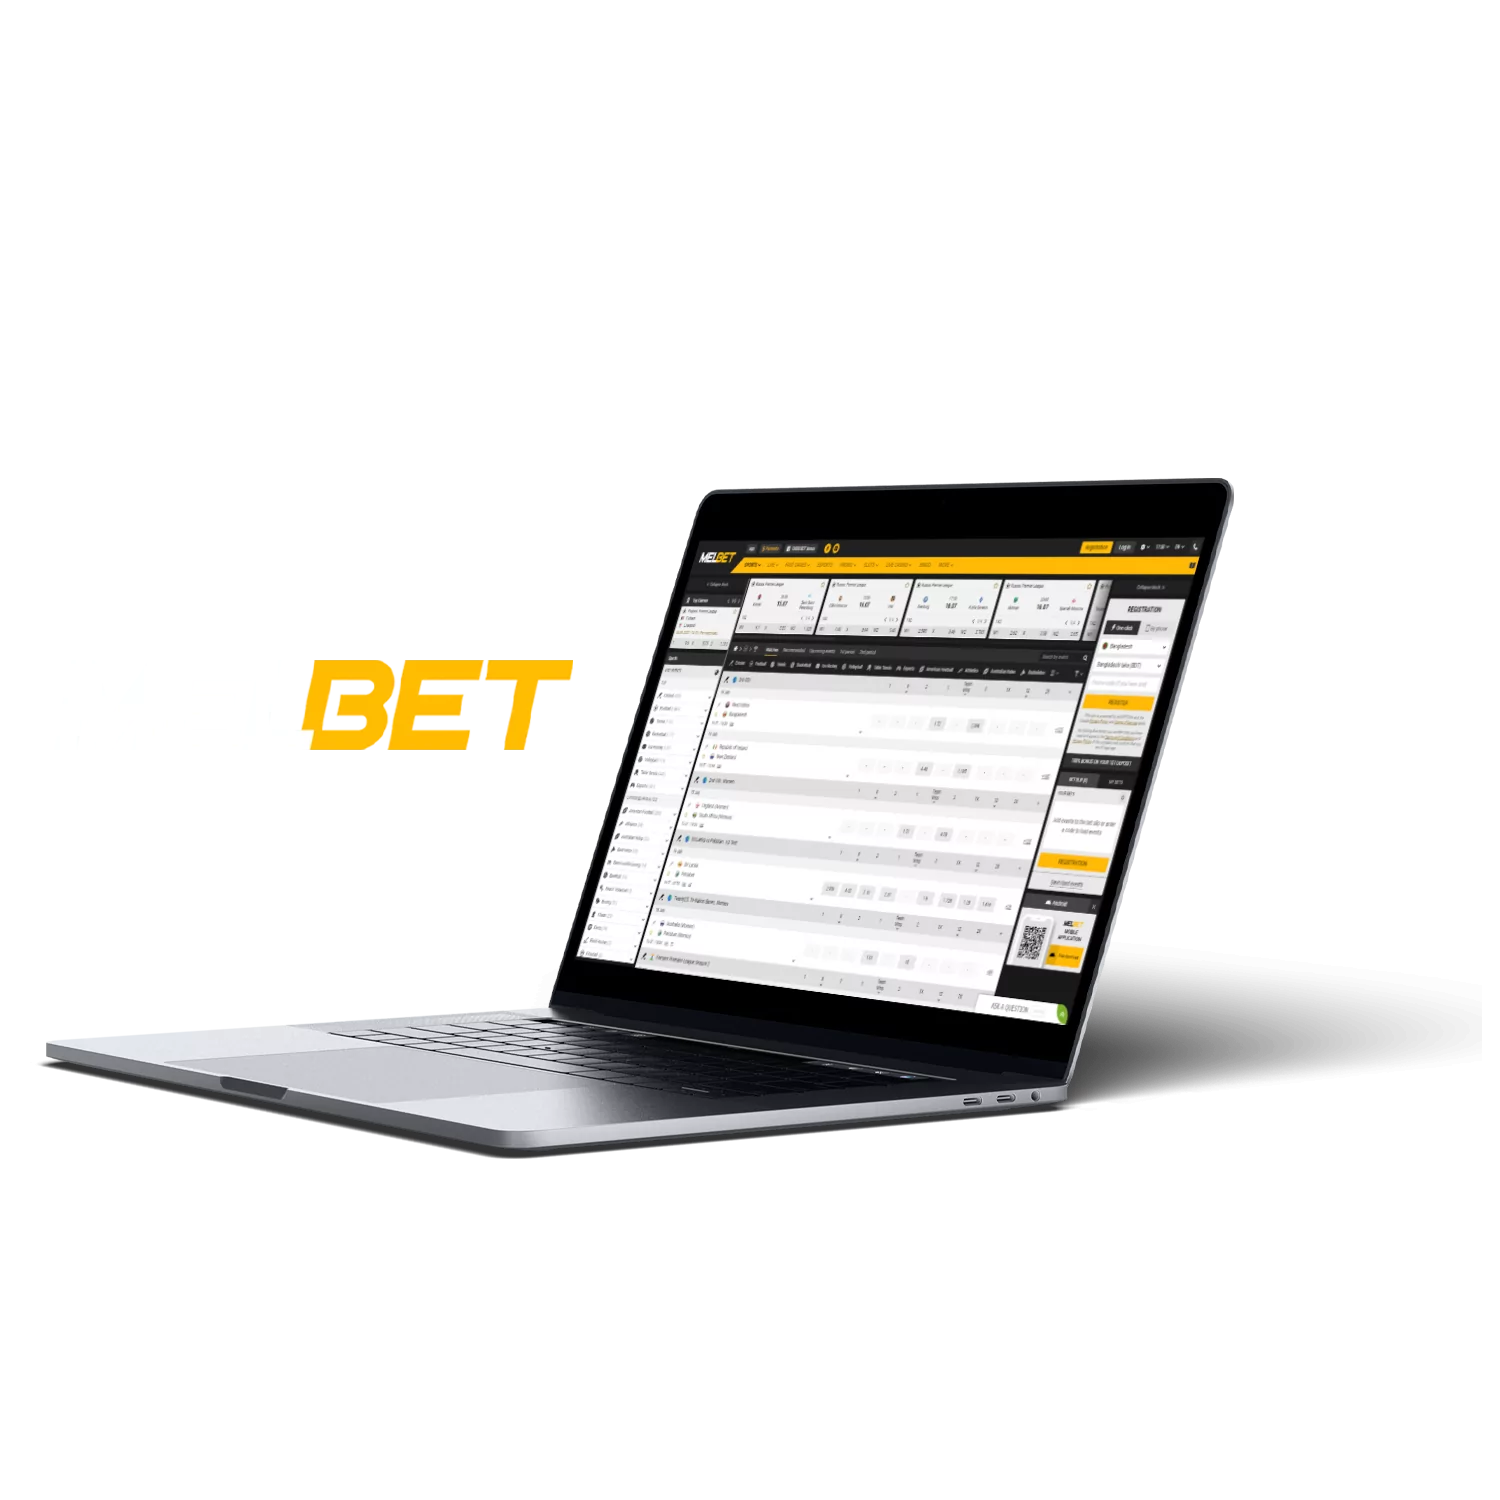 Learn how to use the web version of Melbet for betting and playing casino games.